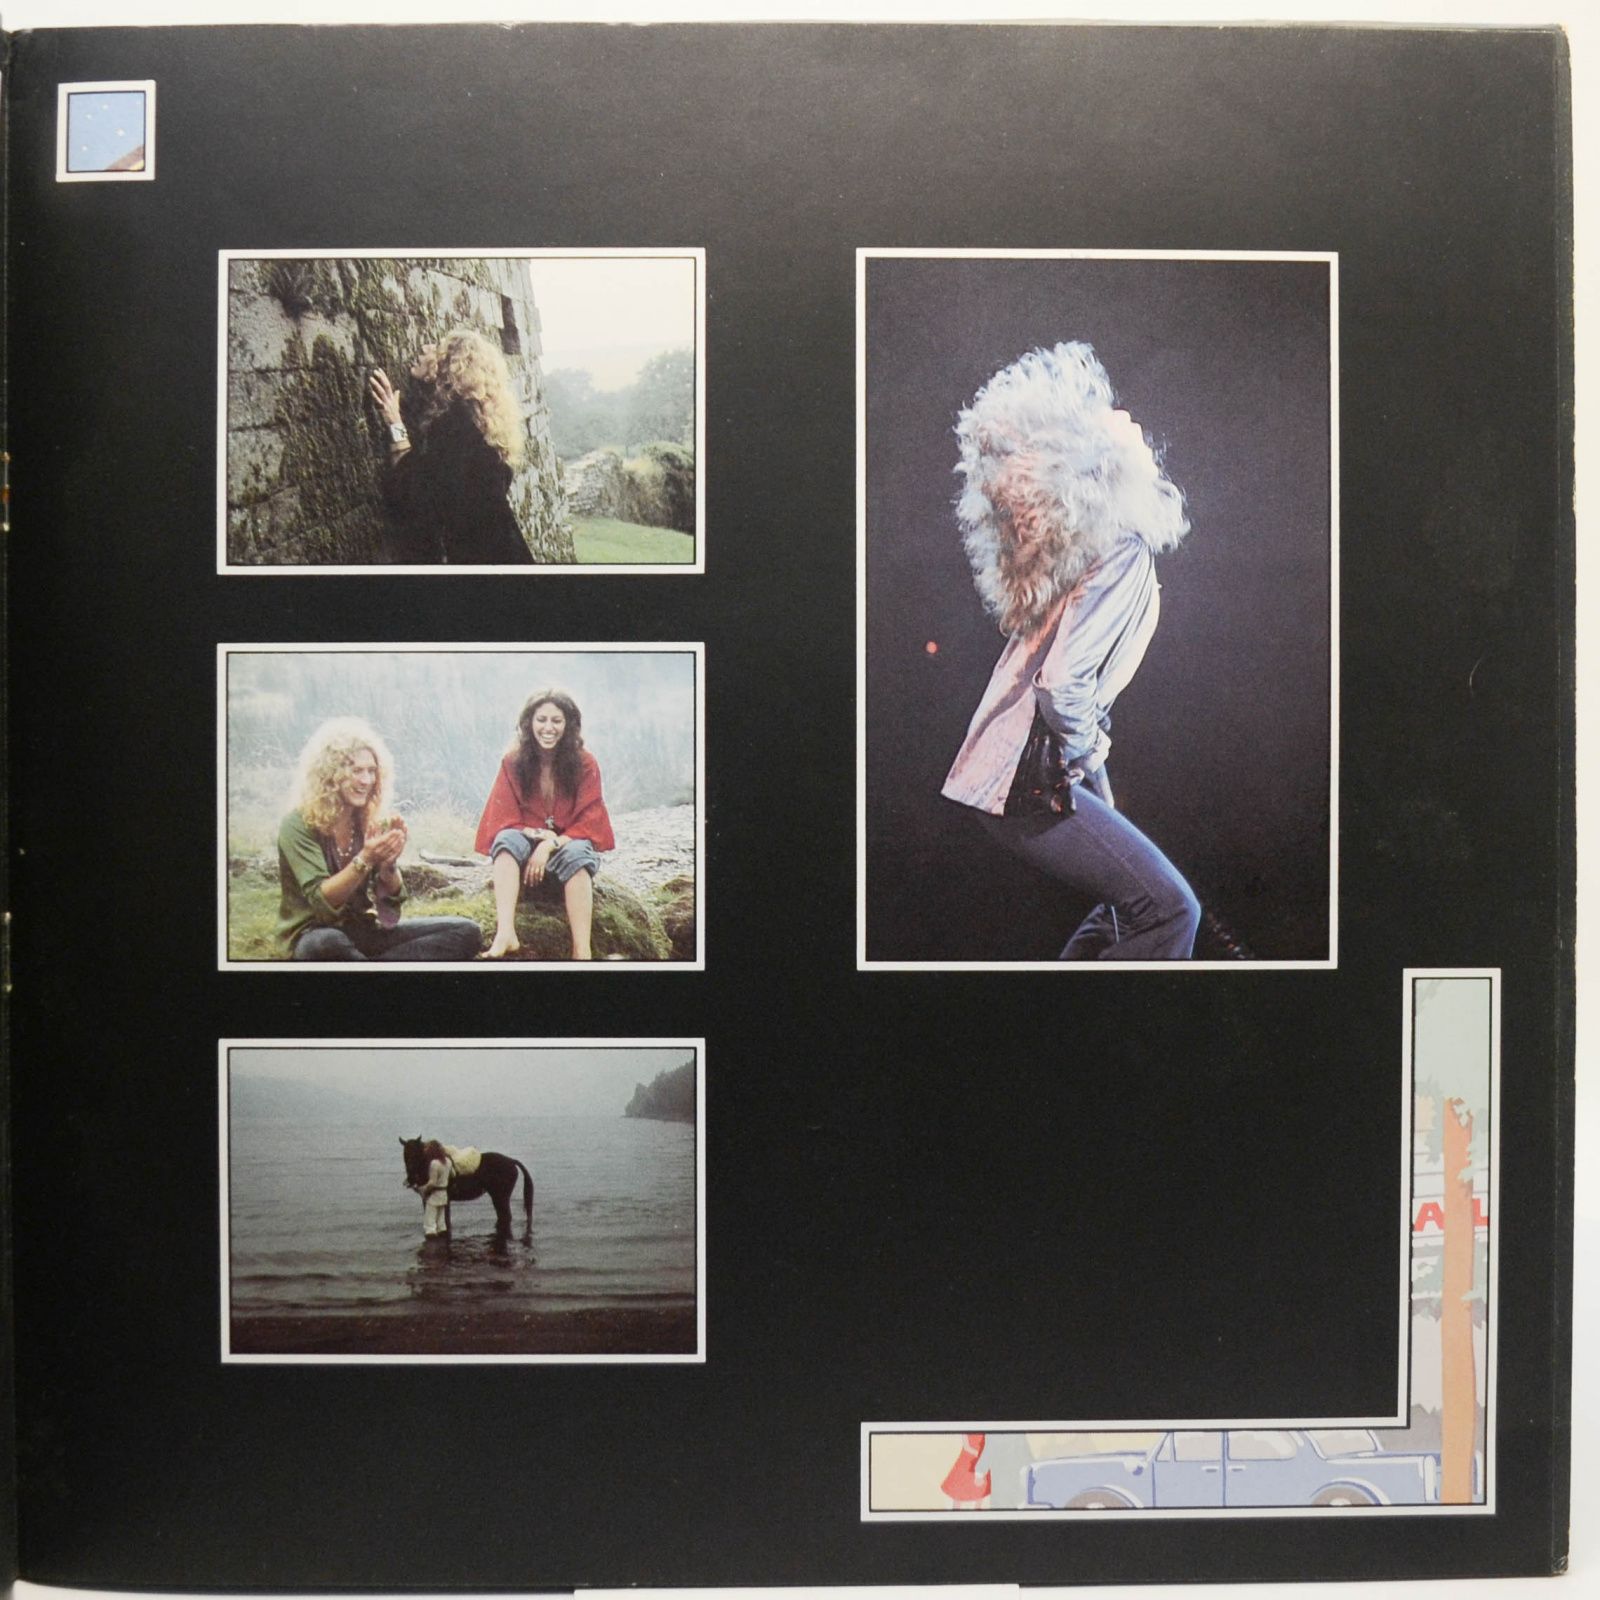 Led Zeppelin — The Soundtrack From The Film The Song Remains The Same (2LP), 1976